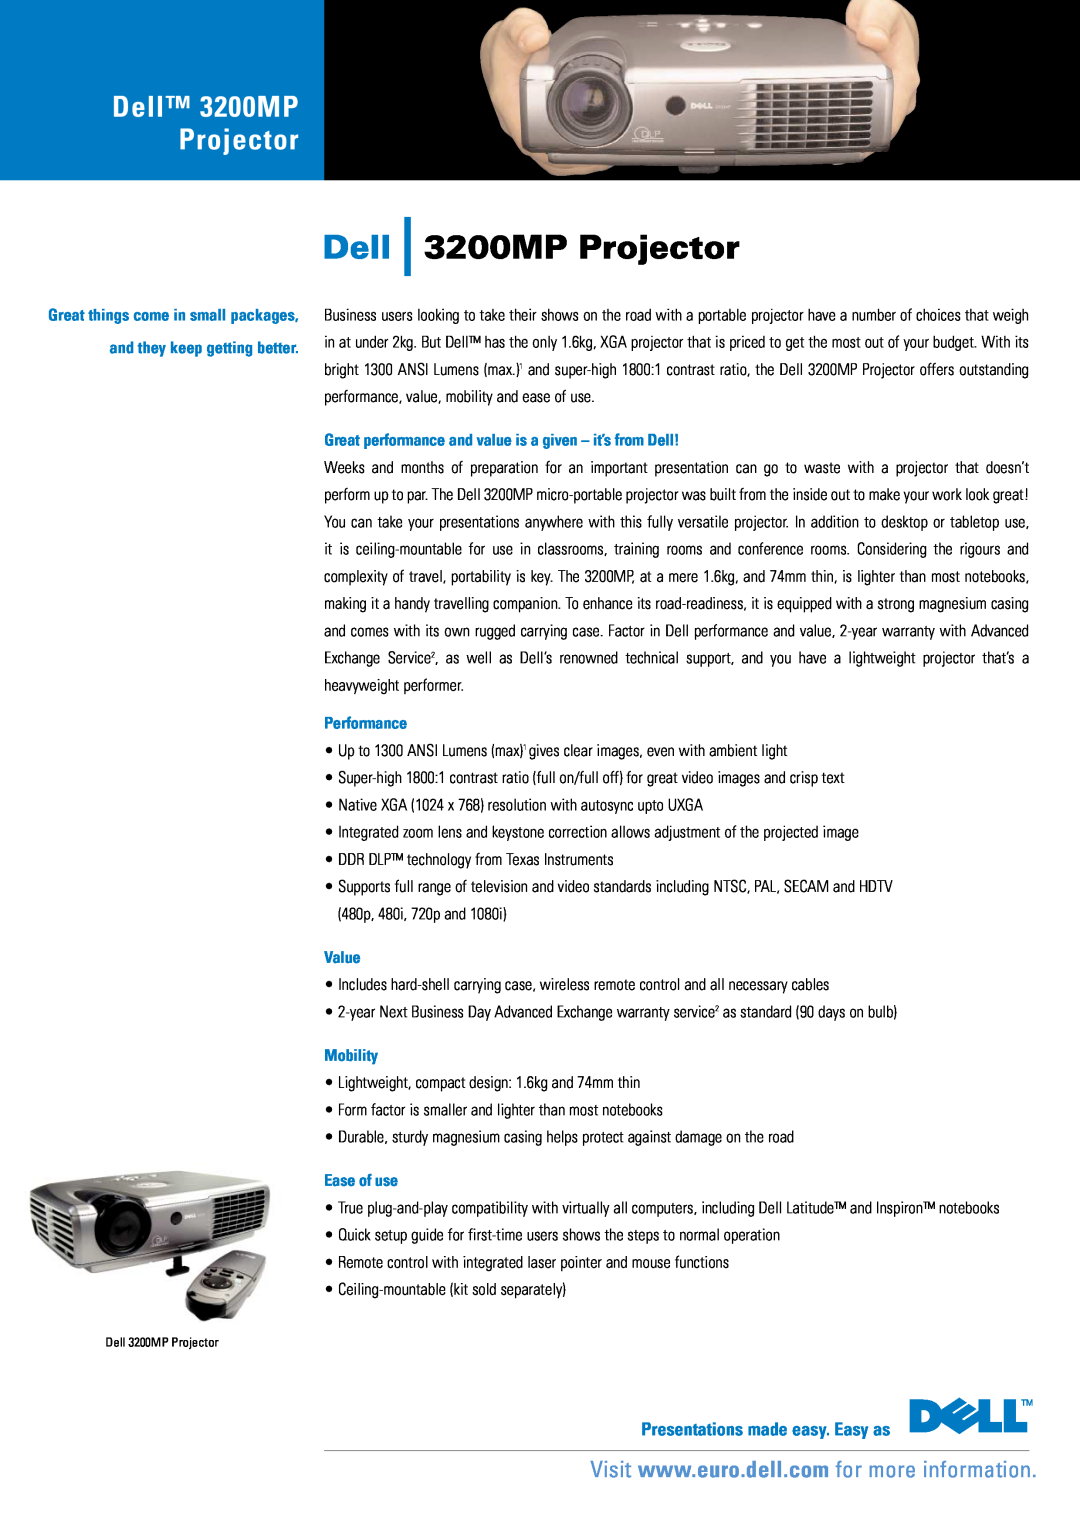 Dell warranty Presentations made easy. Easy as, Dell 3200MP Projector, and they keep getting better, Performance, Value 